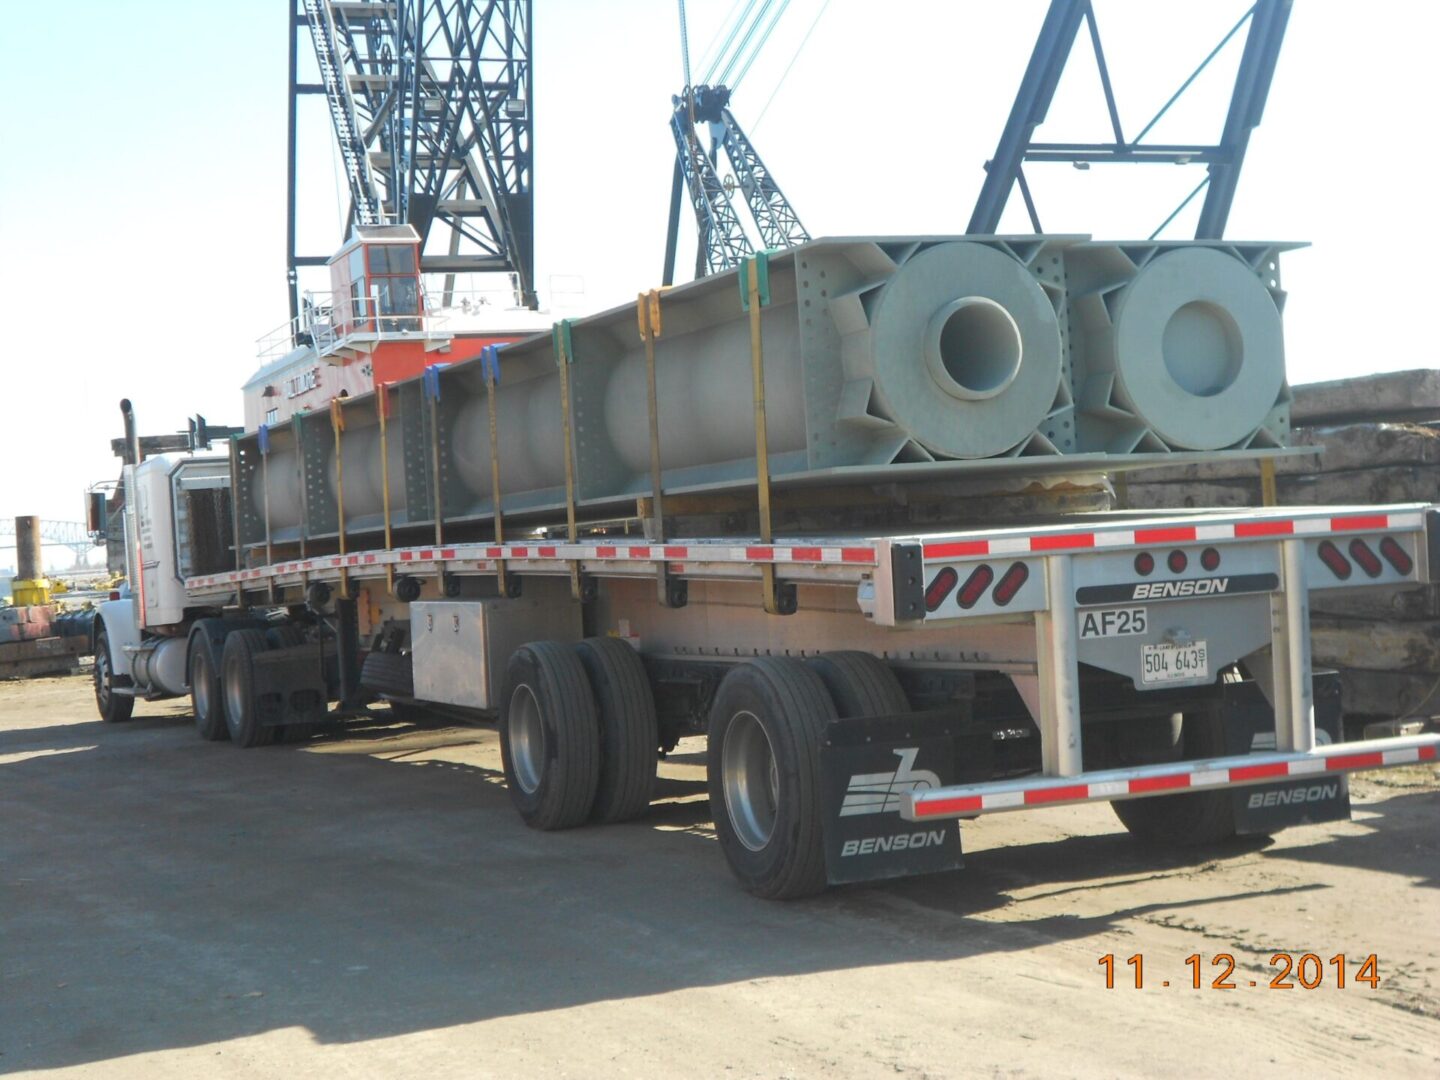 A big truck with heavy material loaded